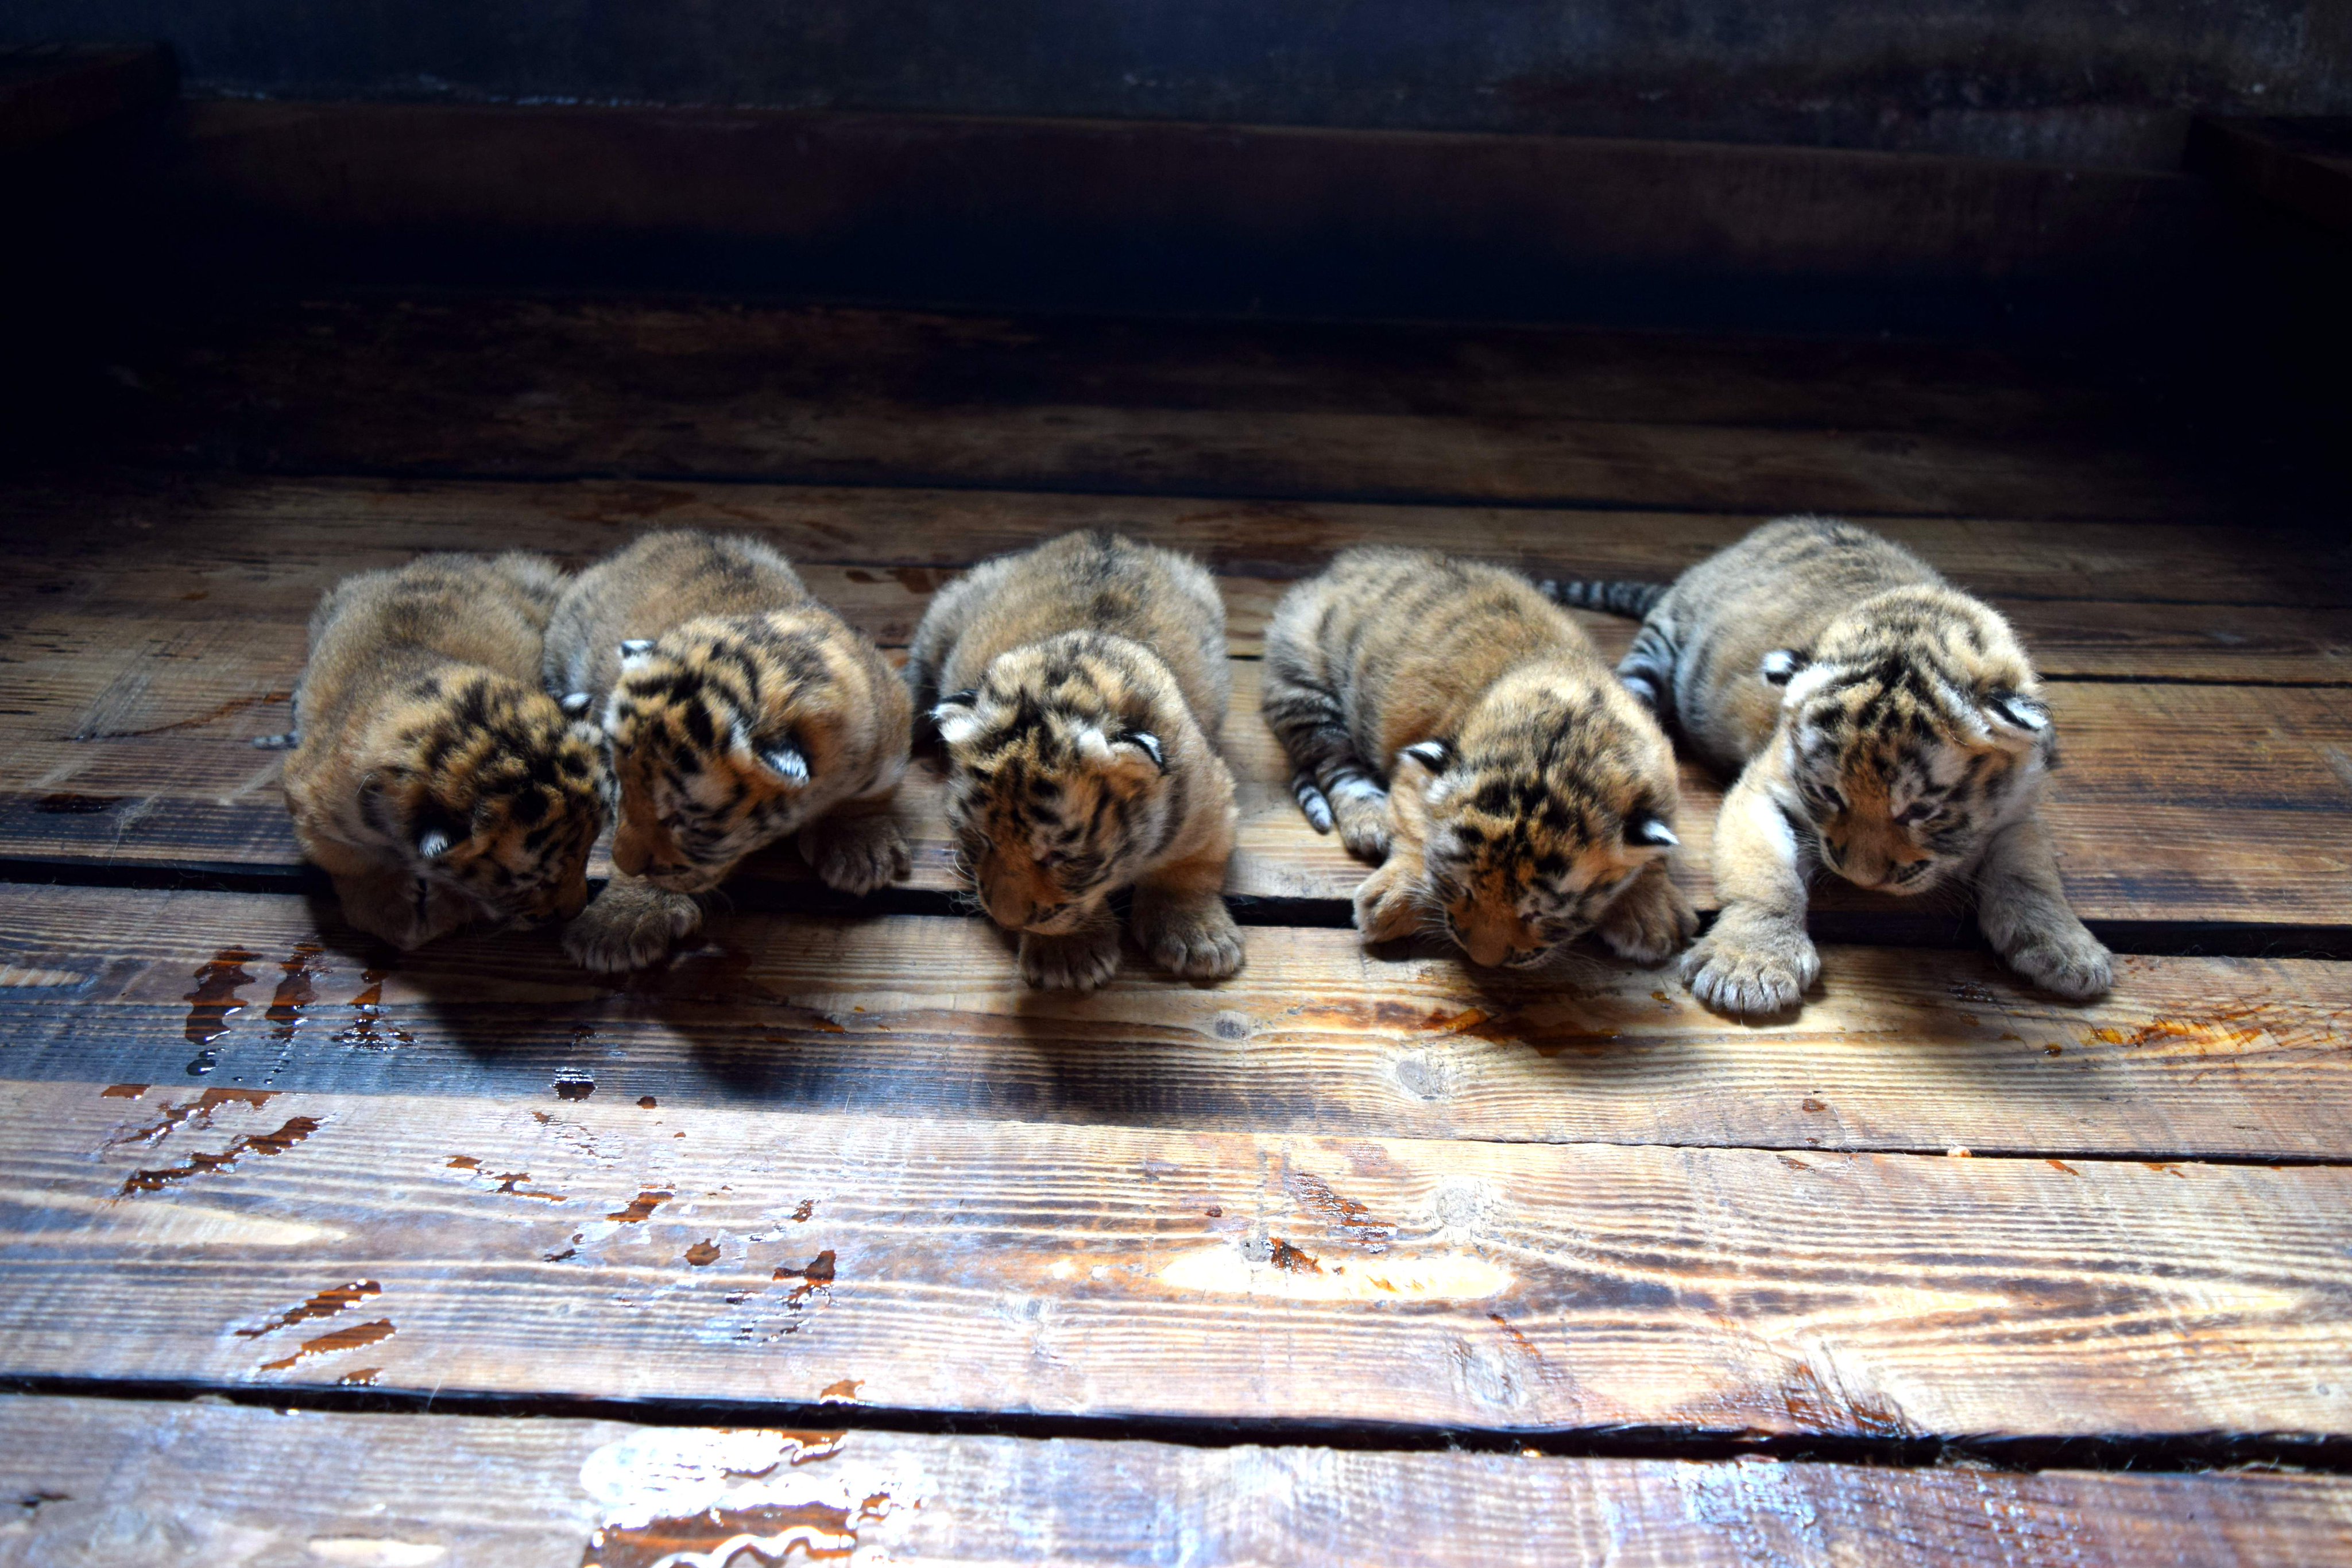 China Daily on X: "Great Mother! A Siberian tiger gave birth to five cubs  at NE China's Hengdaohezi Feline Breeding Center. Usually, Siberian tigers  give birth to two to four cubs at